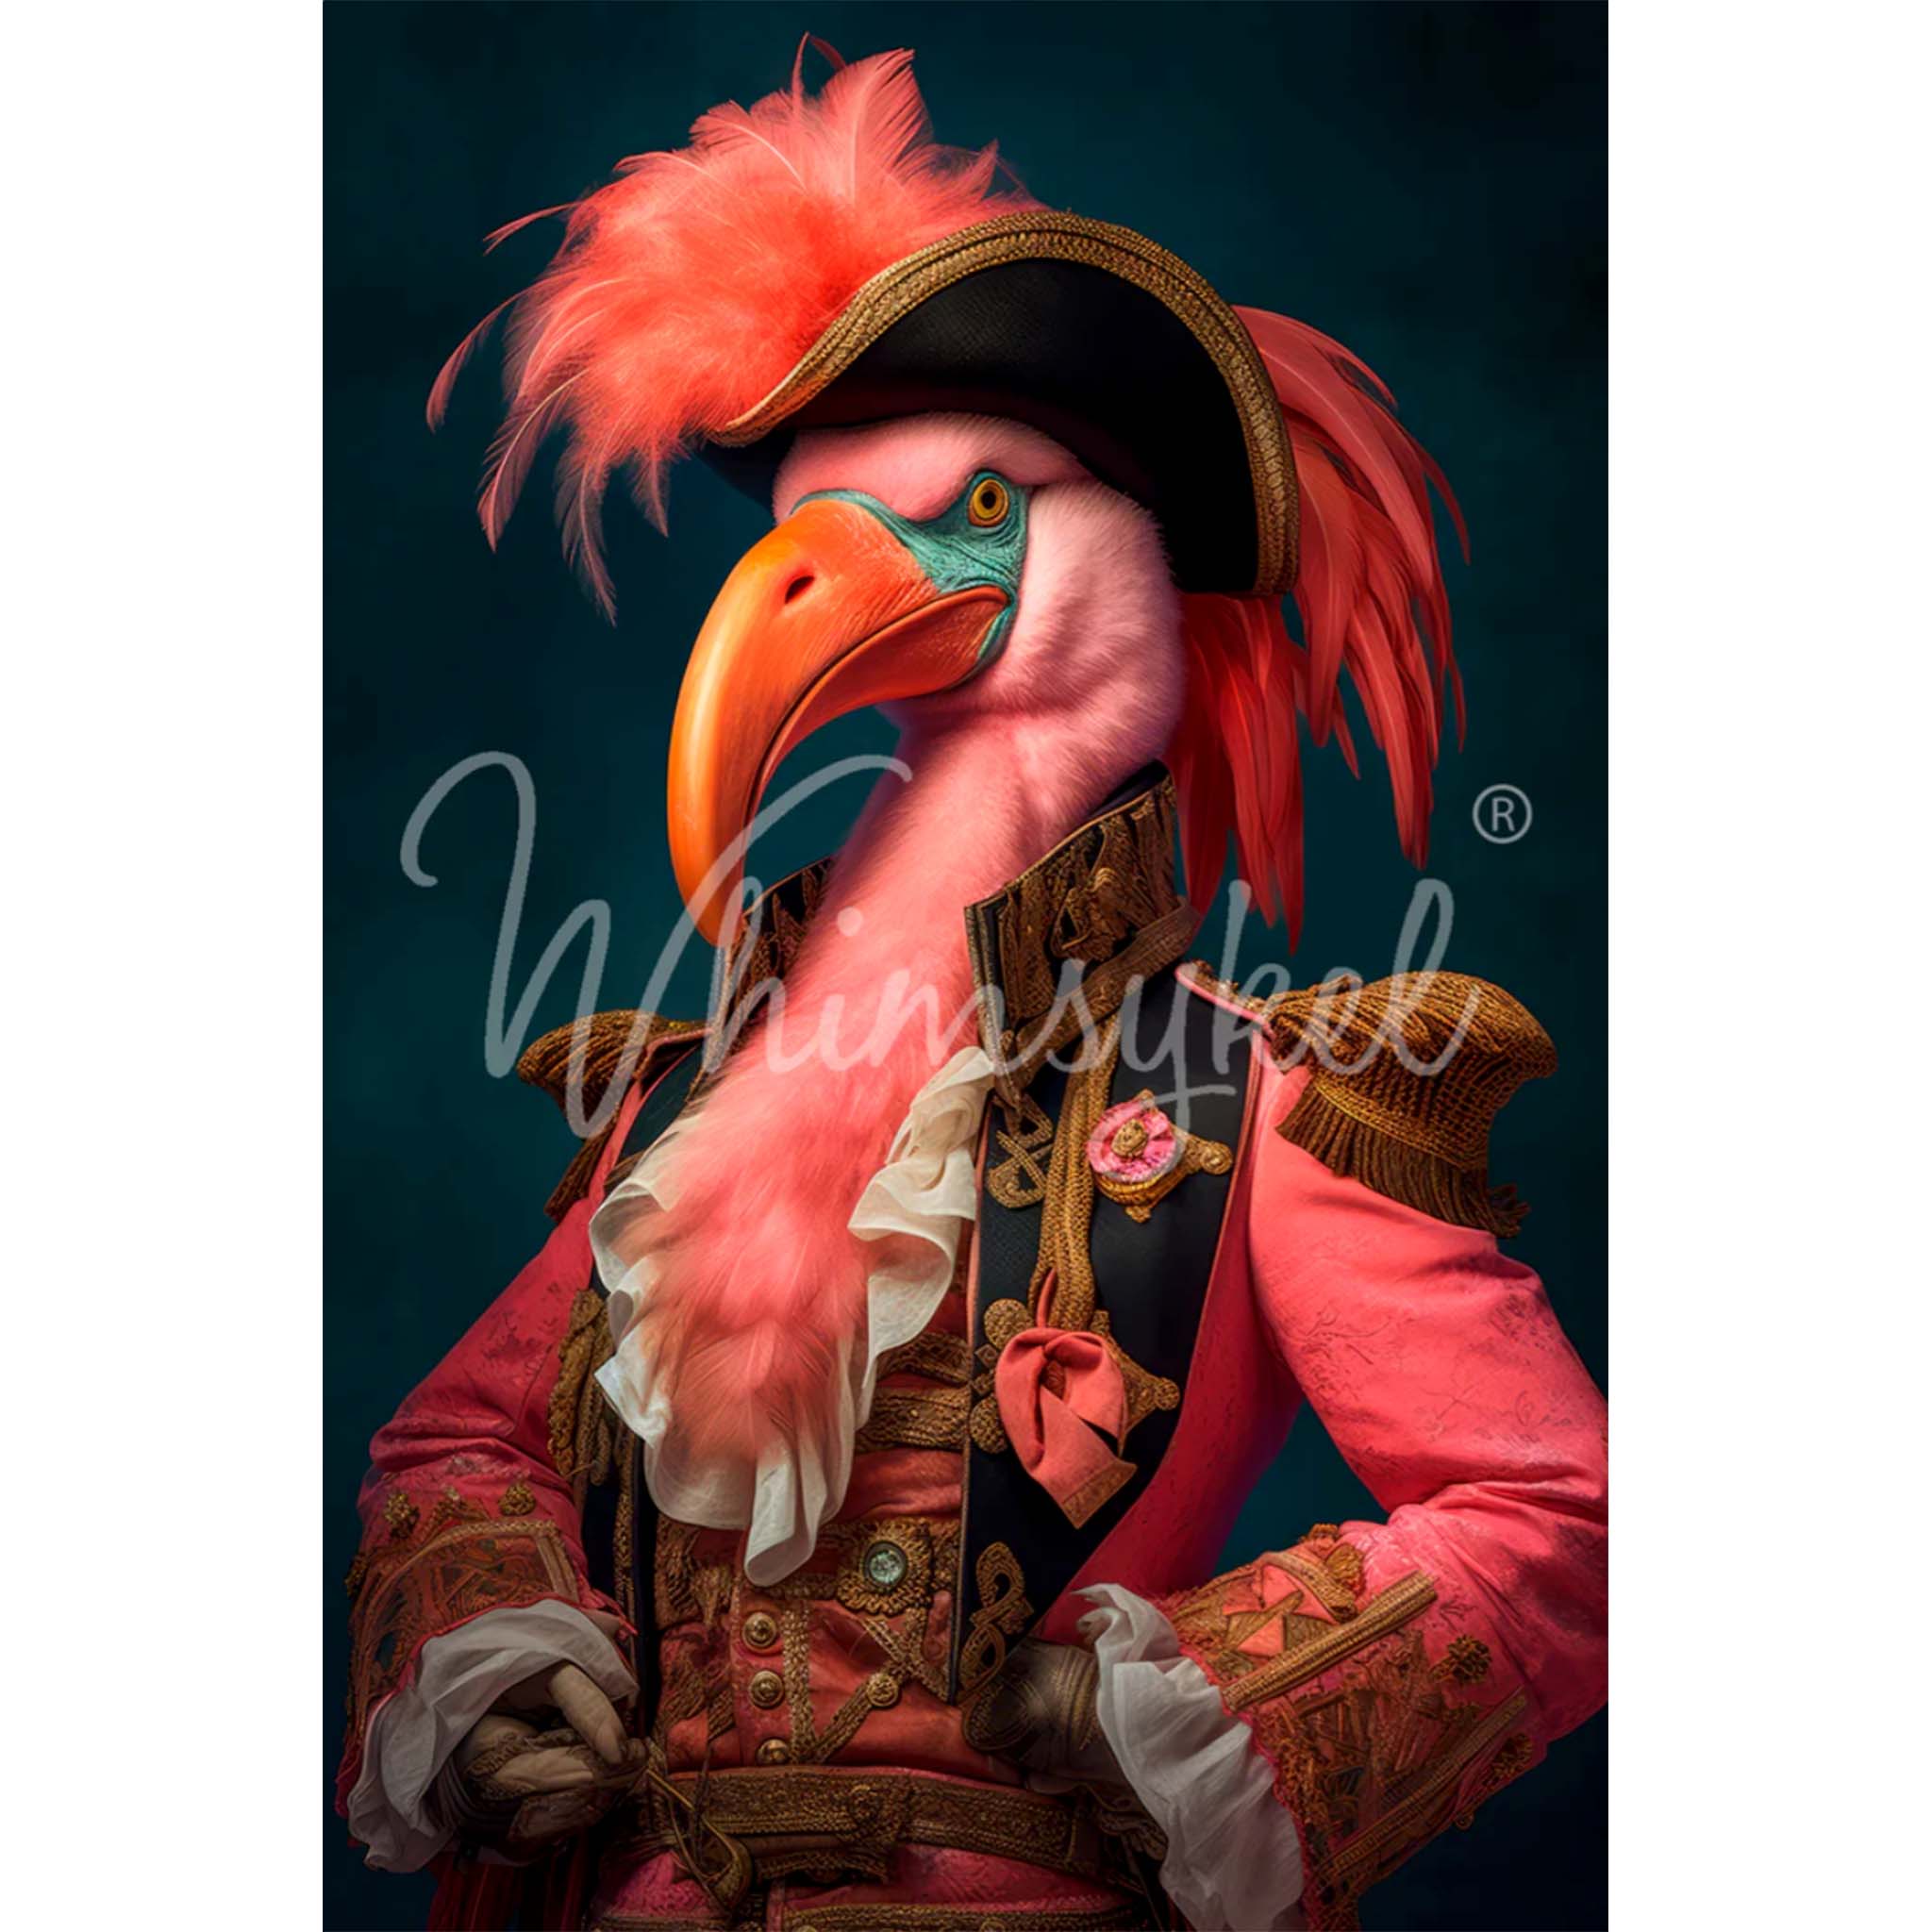 Tissue paper design that features a flamingo in a pirate captain outfit and hat. White borders are on the sides.